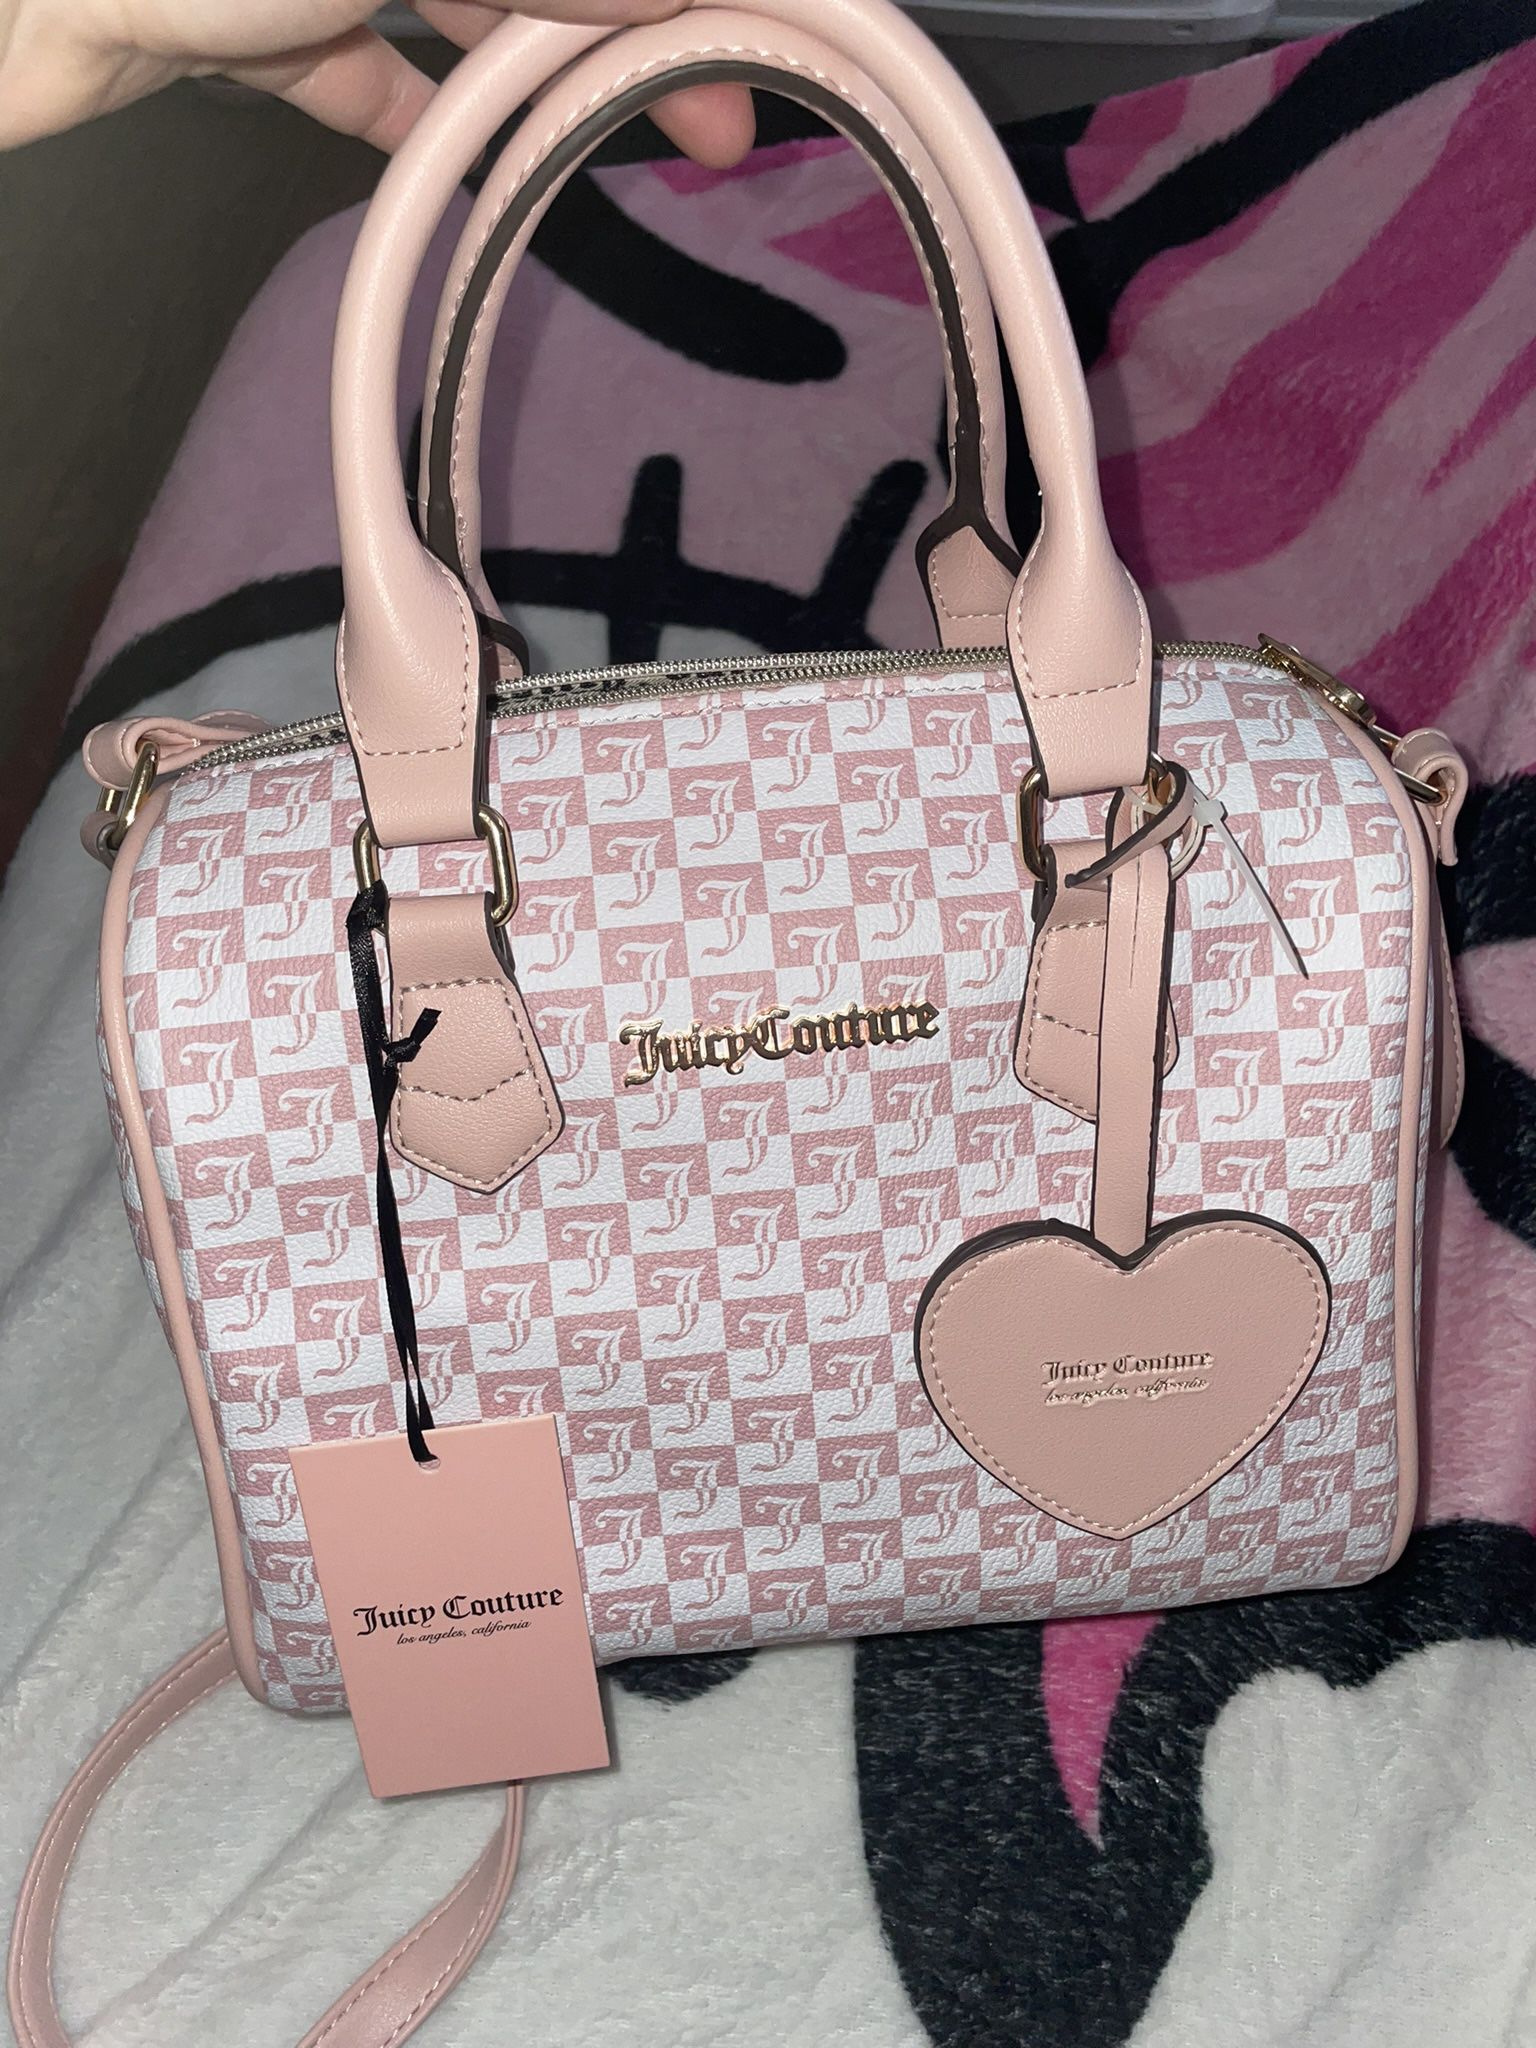 Juicy Couture Purse Pink and White Checkered 